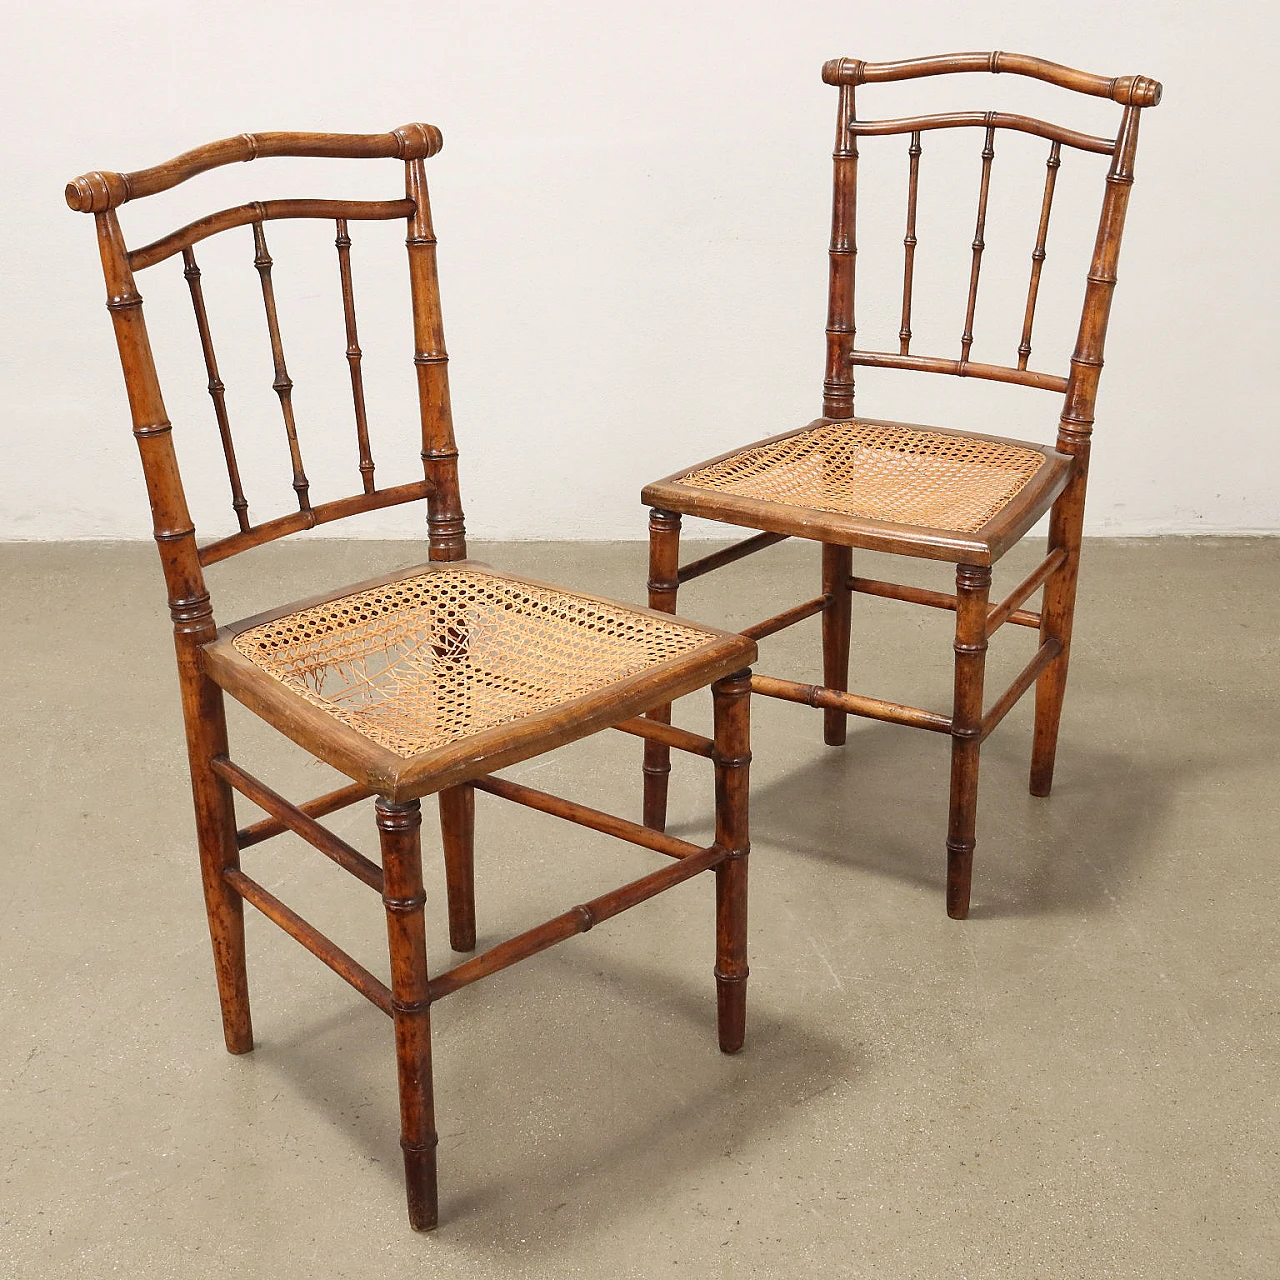 Pair of Chiavarine chairs in maple & cane seat, 19th century 3